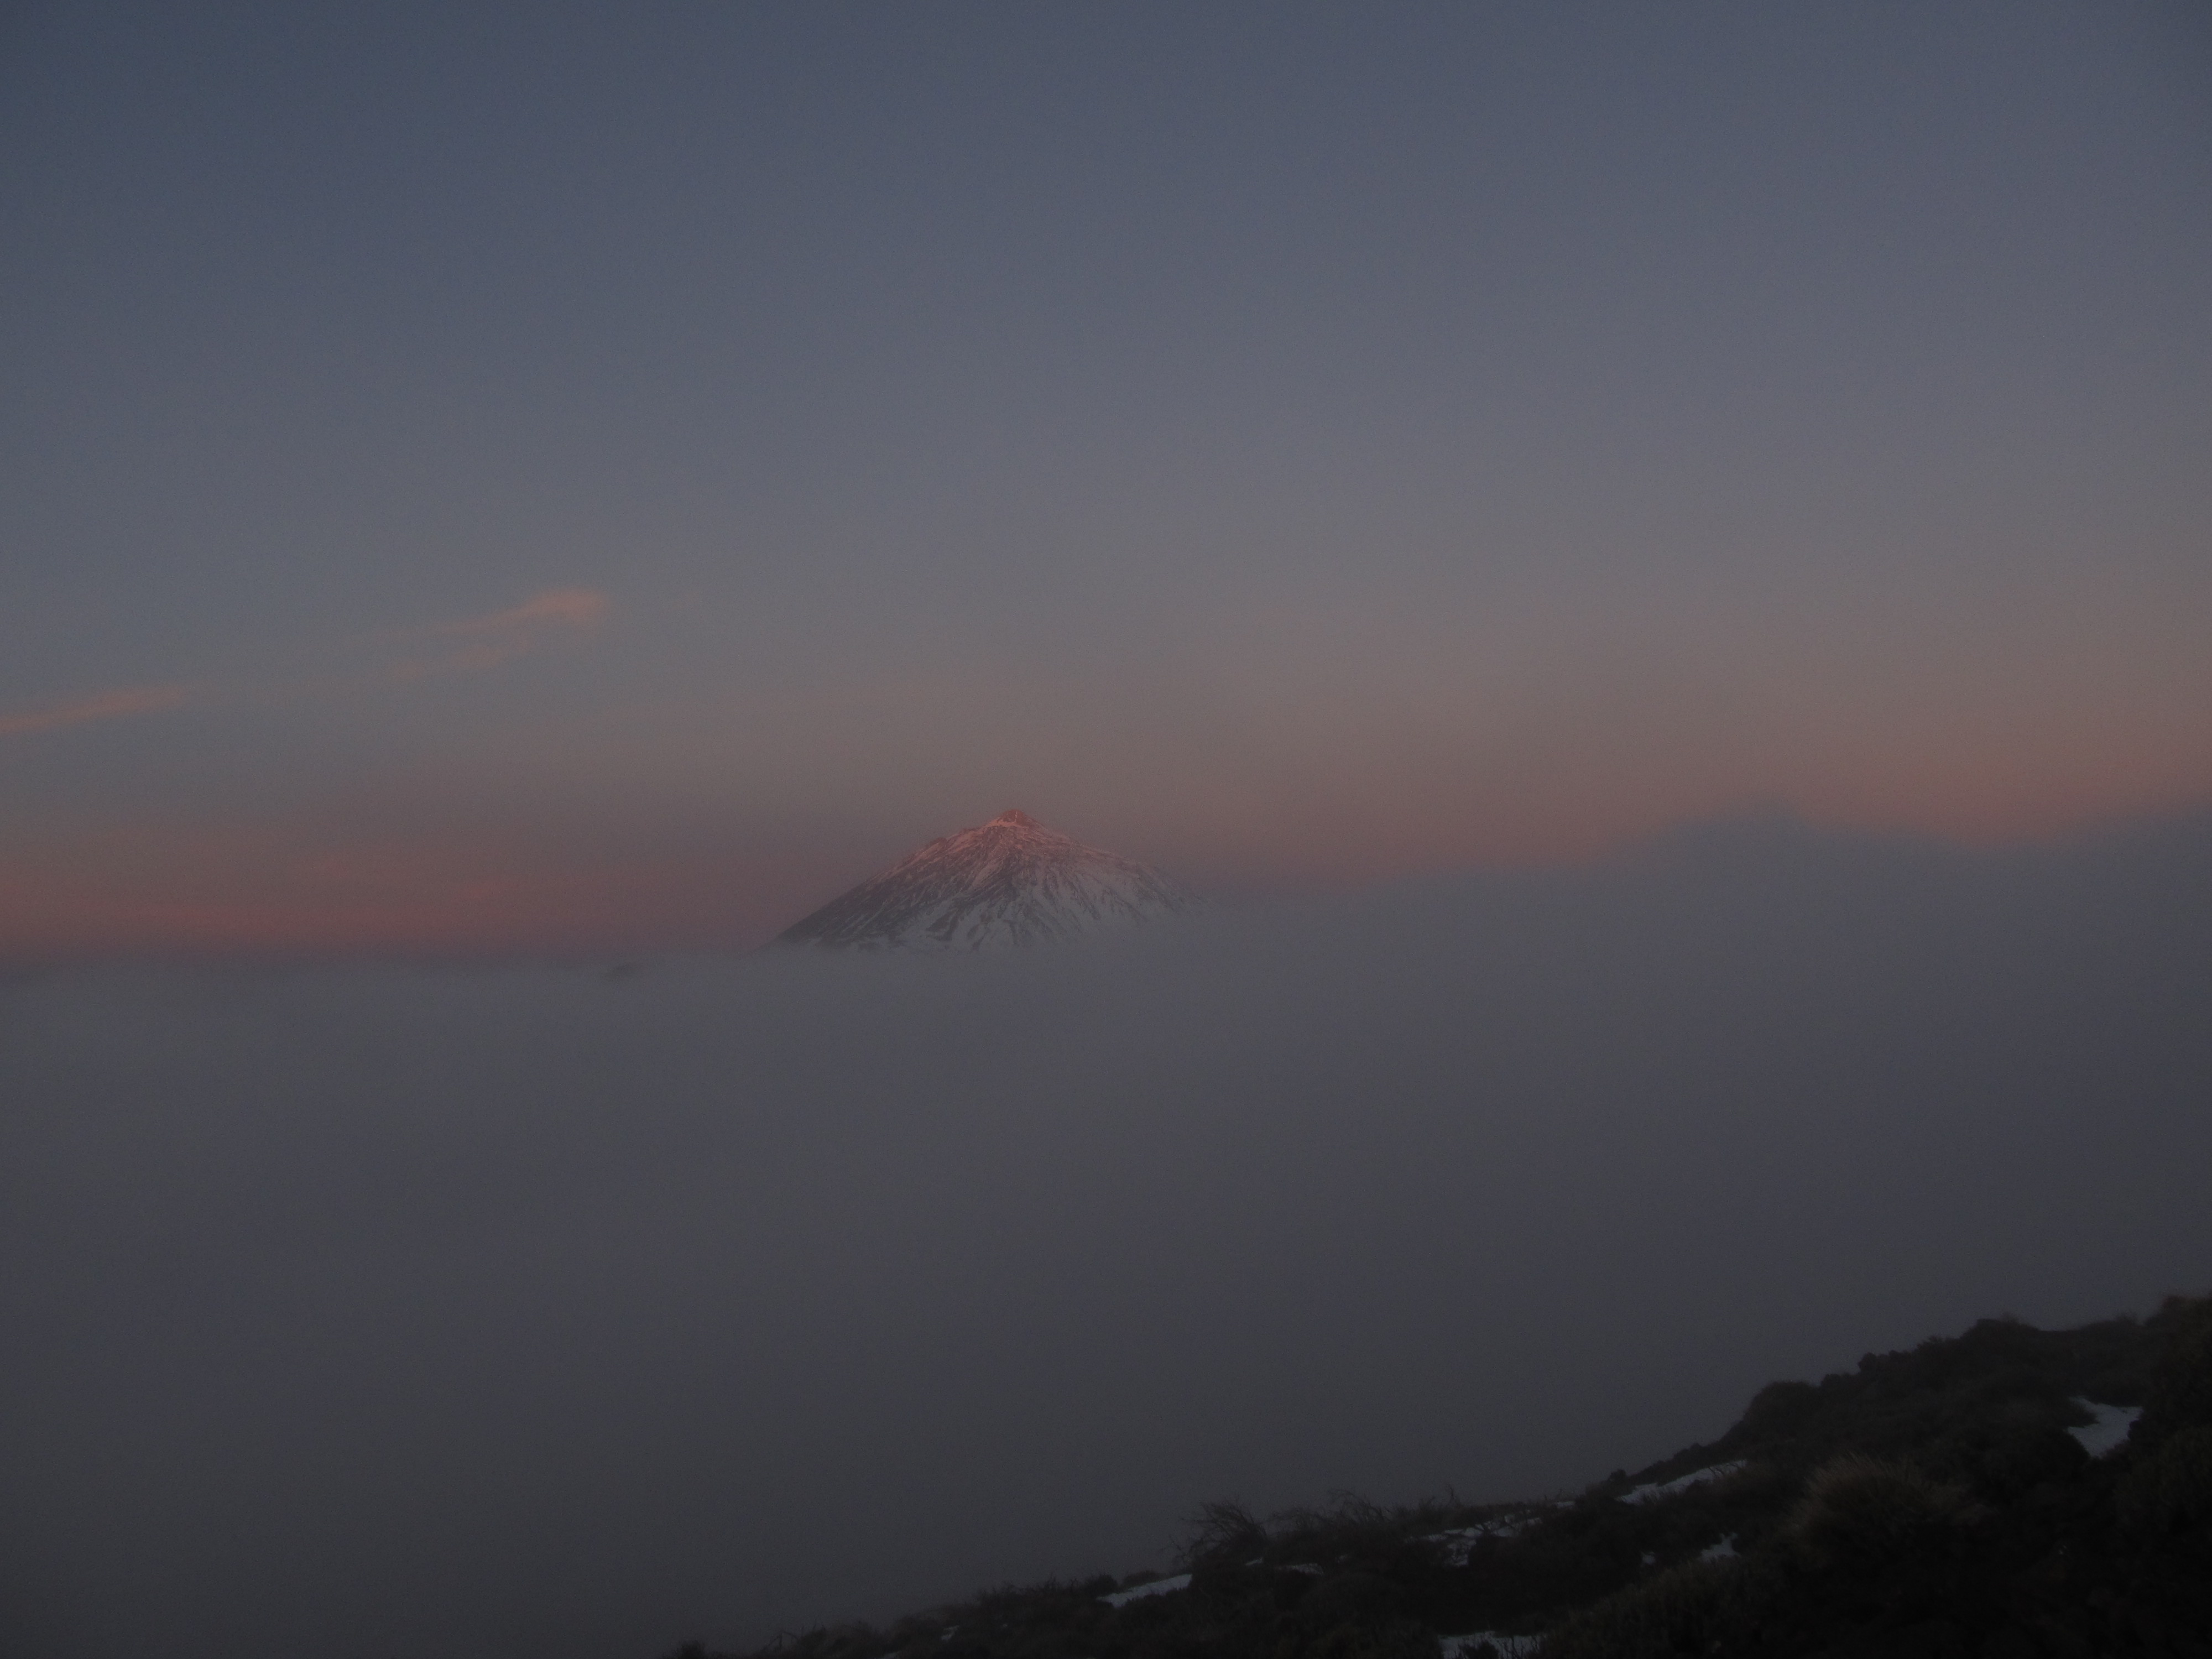 Sunrise at the top of the Teide